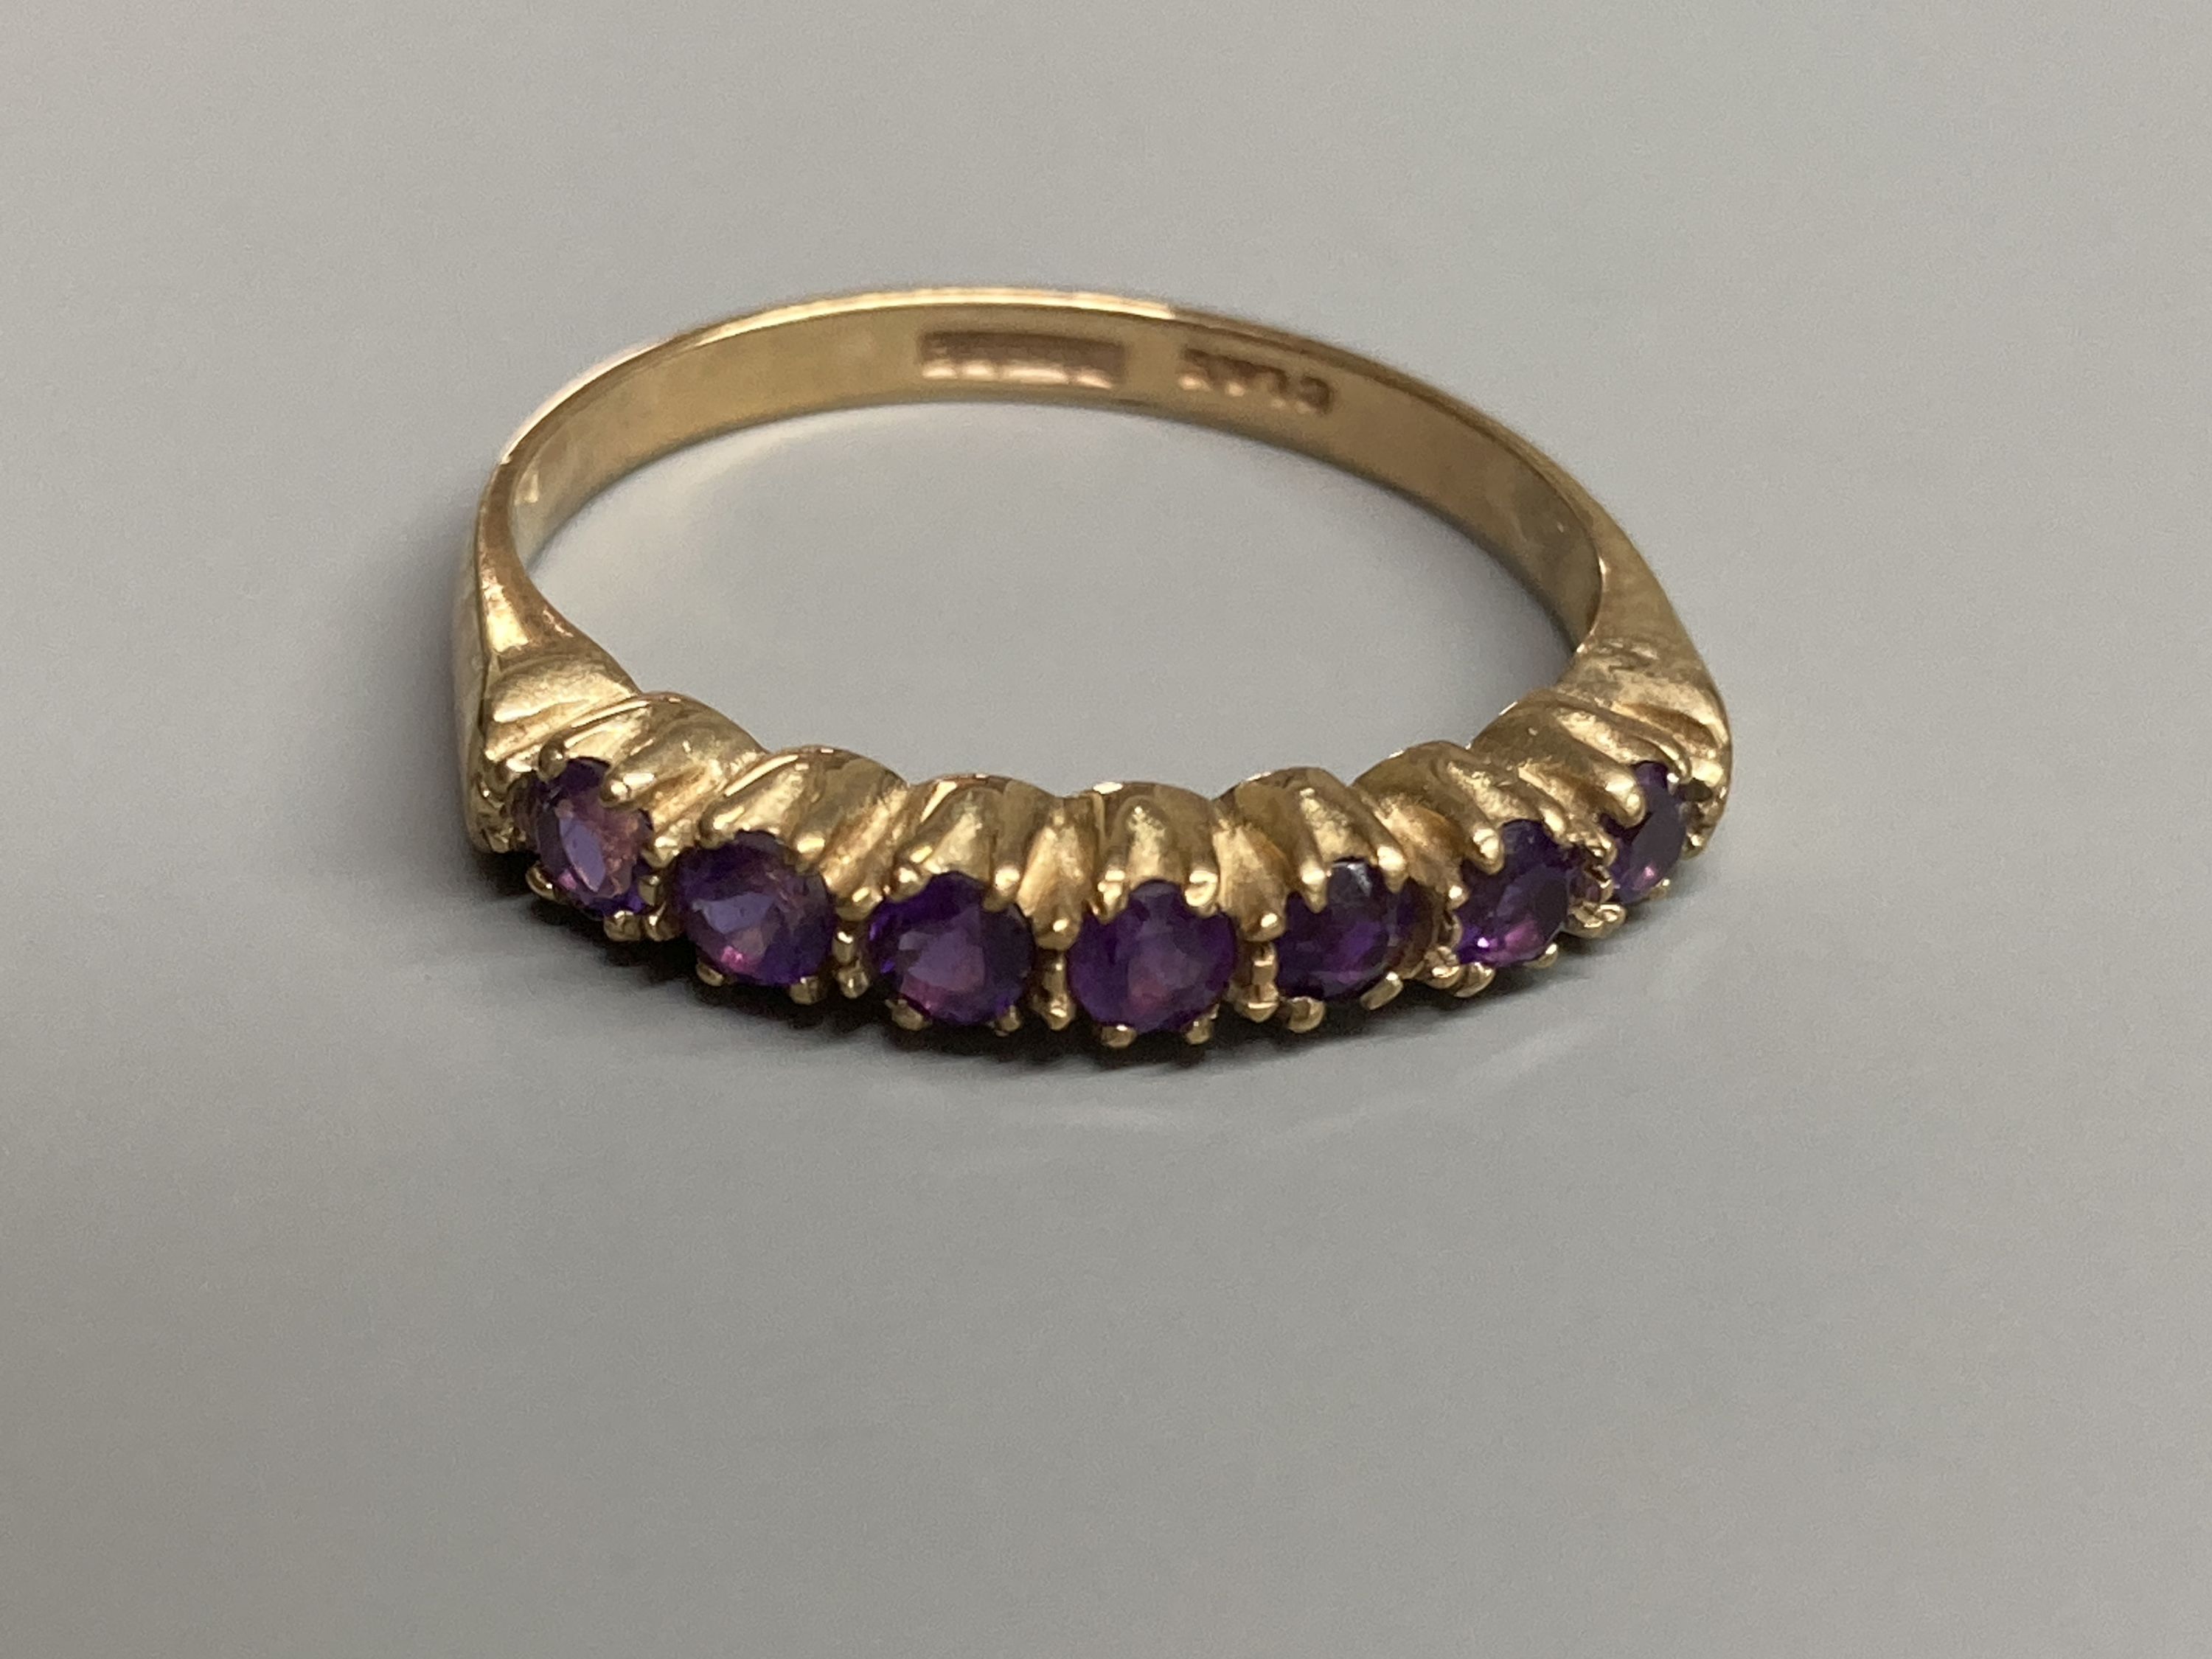 A modern 9ct gold, ruby and diamond set half hoop ring and a similar amethyst ring and two other 9ct gold gem set rings